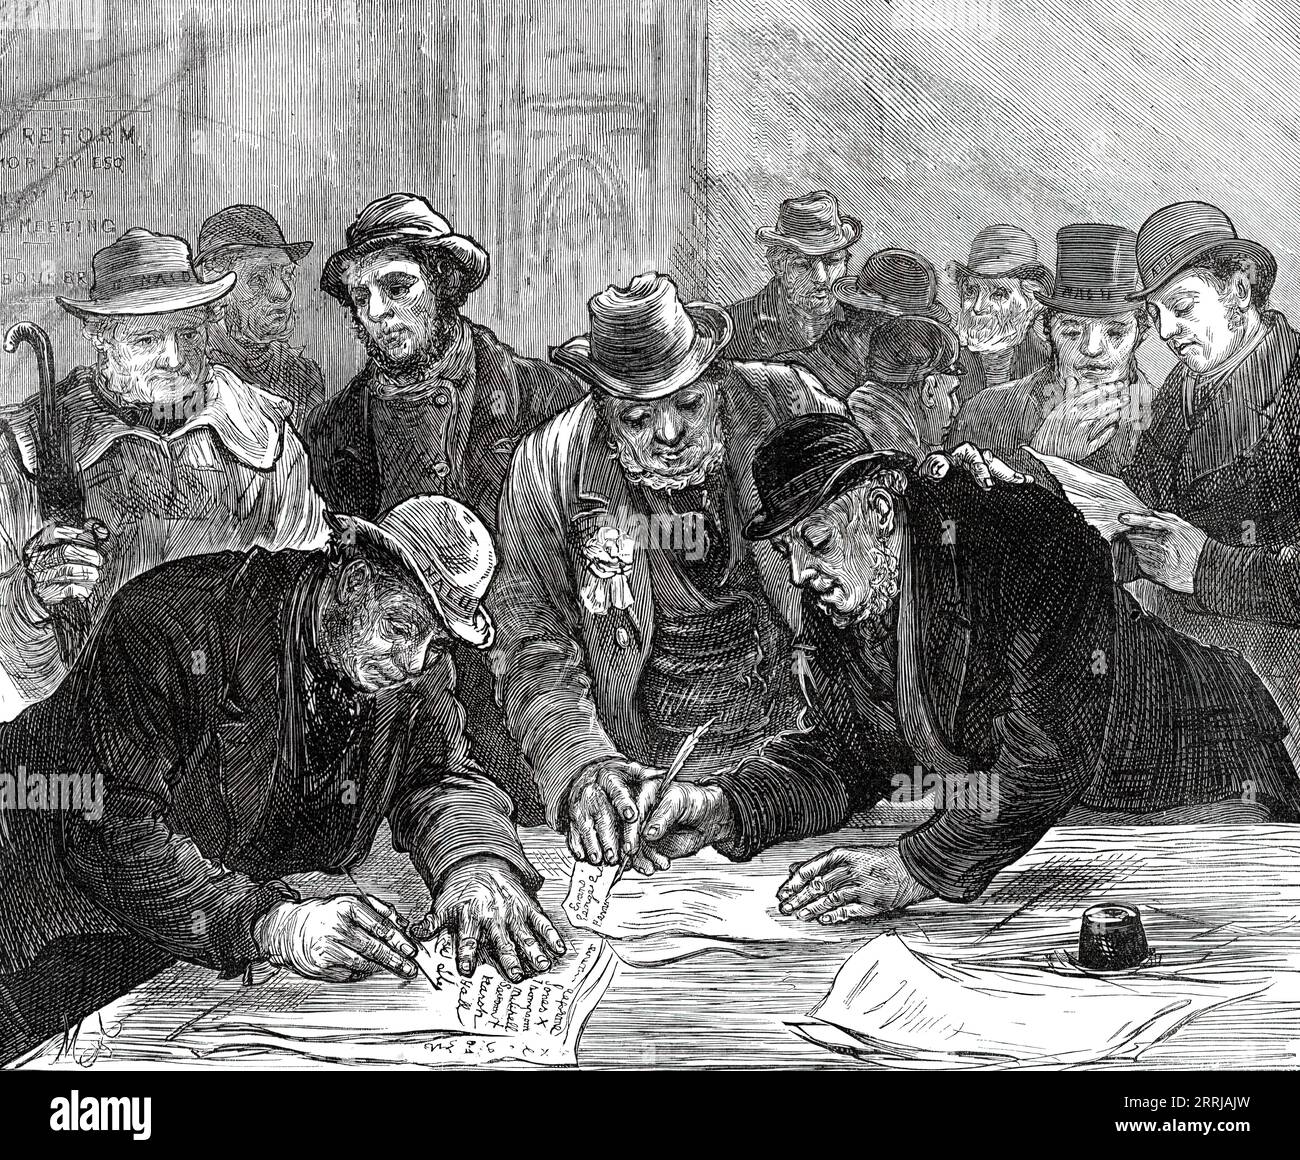 Agricultural Labourers' Union at the Memorial Hall, Farringdon-Street, [London]: Delegates signing Petition, 1876. 'About a thousand persons from different parts of the country were present, and the body of the room and the galleries were densely crowded. Nearly all the labourers' delegates wore sashes and rosettes, with the initials of the Union...The practical object of the conference was to strengthen the hands of Mr. Trevelyan in connection with his pending motion relating to electoral reform. With this view, after hearing a number of speakers, resolutions were passed in favour of making t Stock Photo